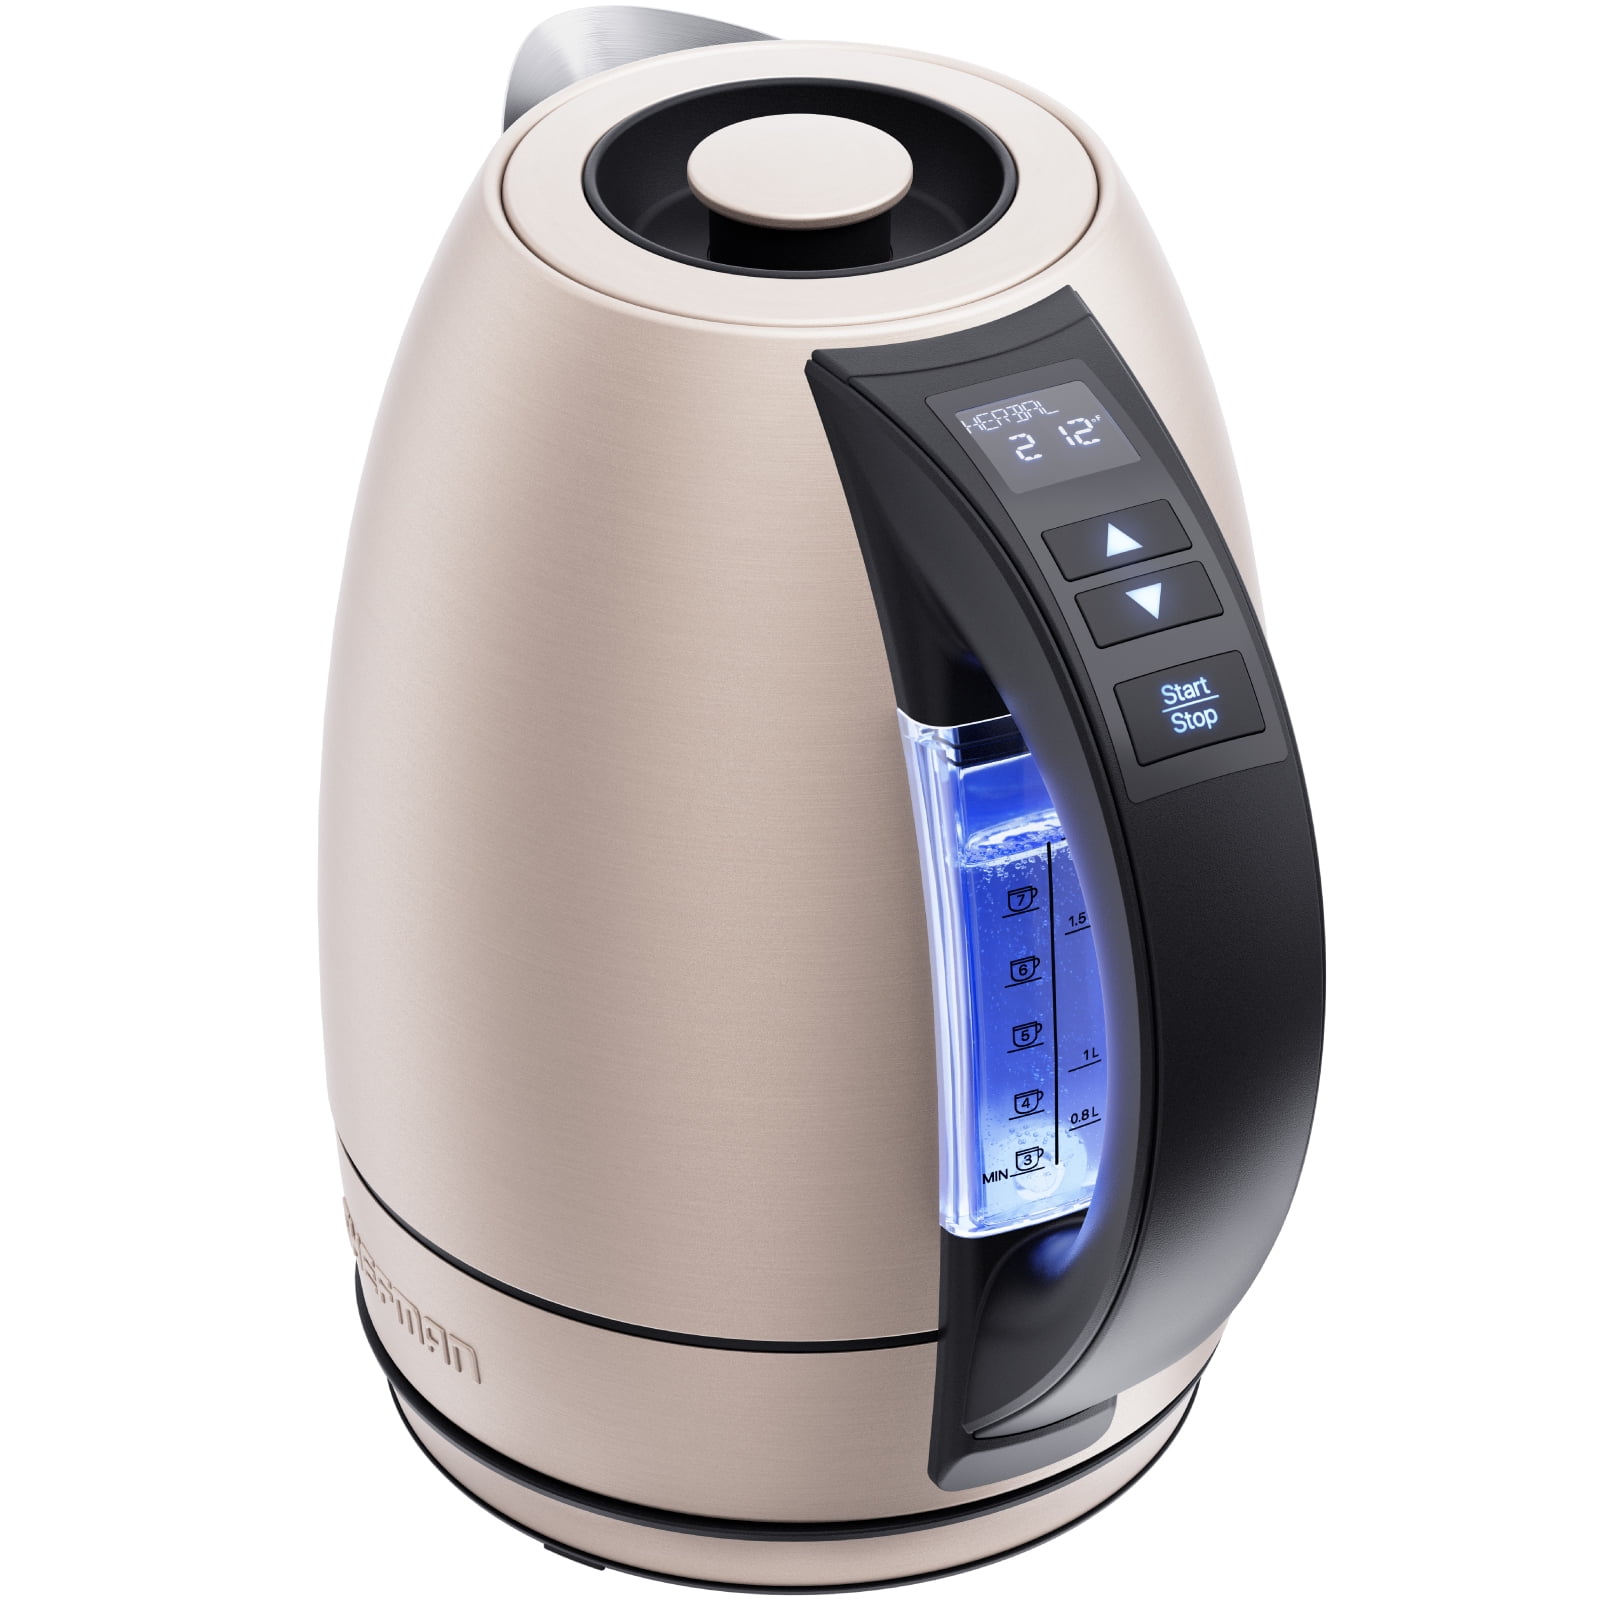 A kettle with temp control is a very nice thing to have when